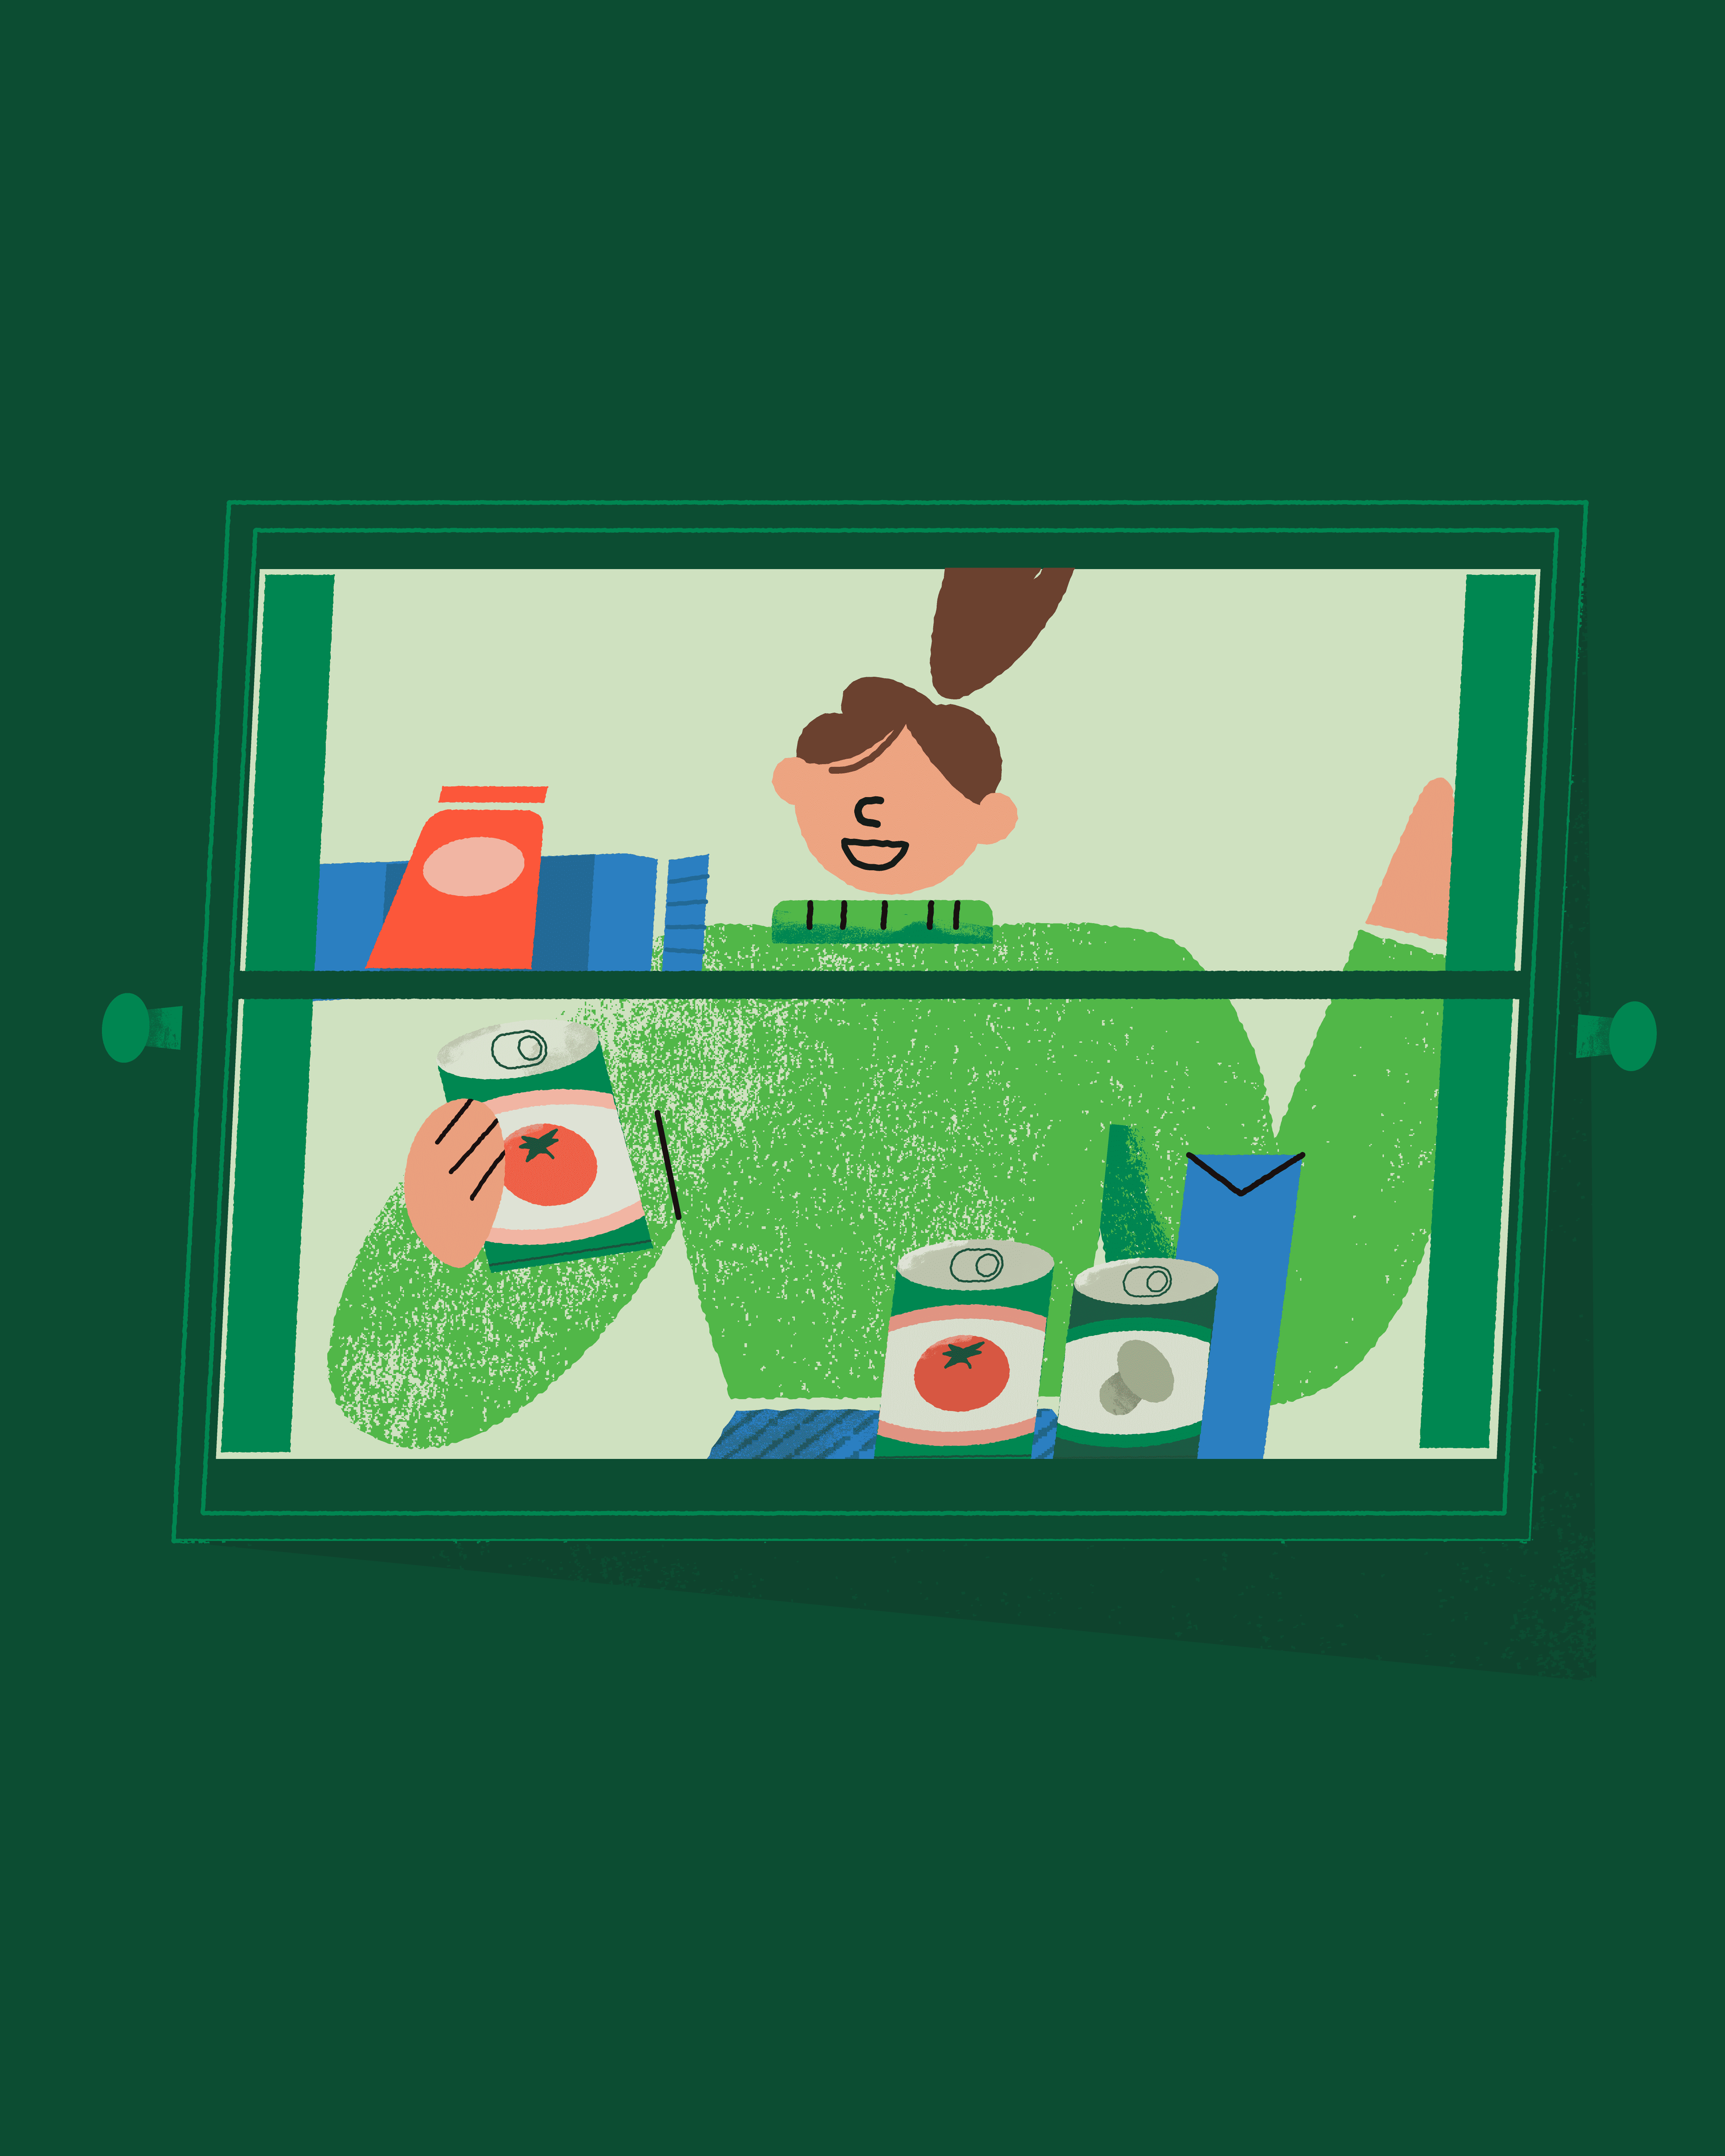 Animation production company illustration - Trussell Trust